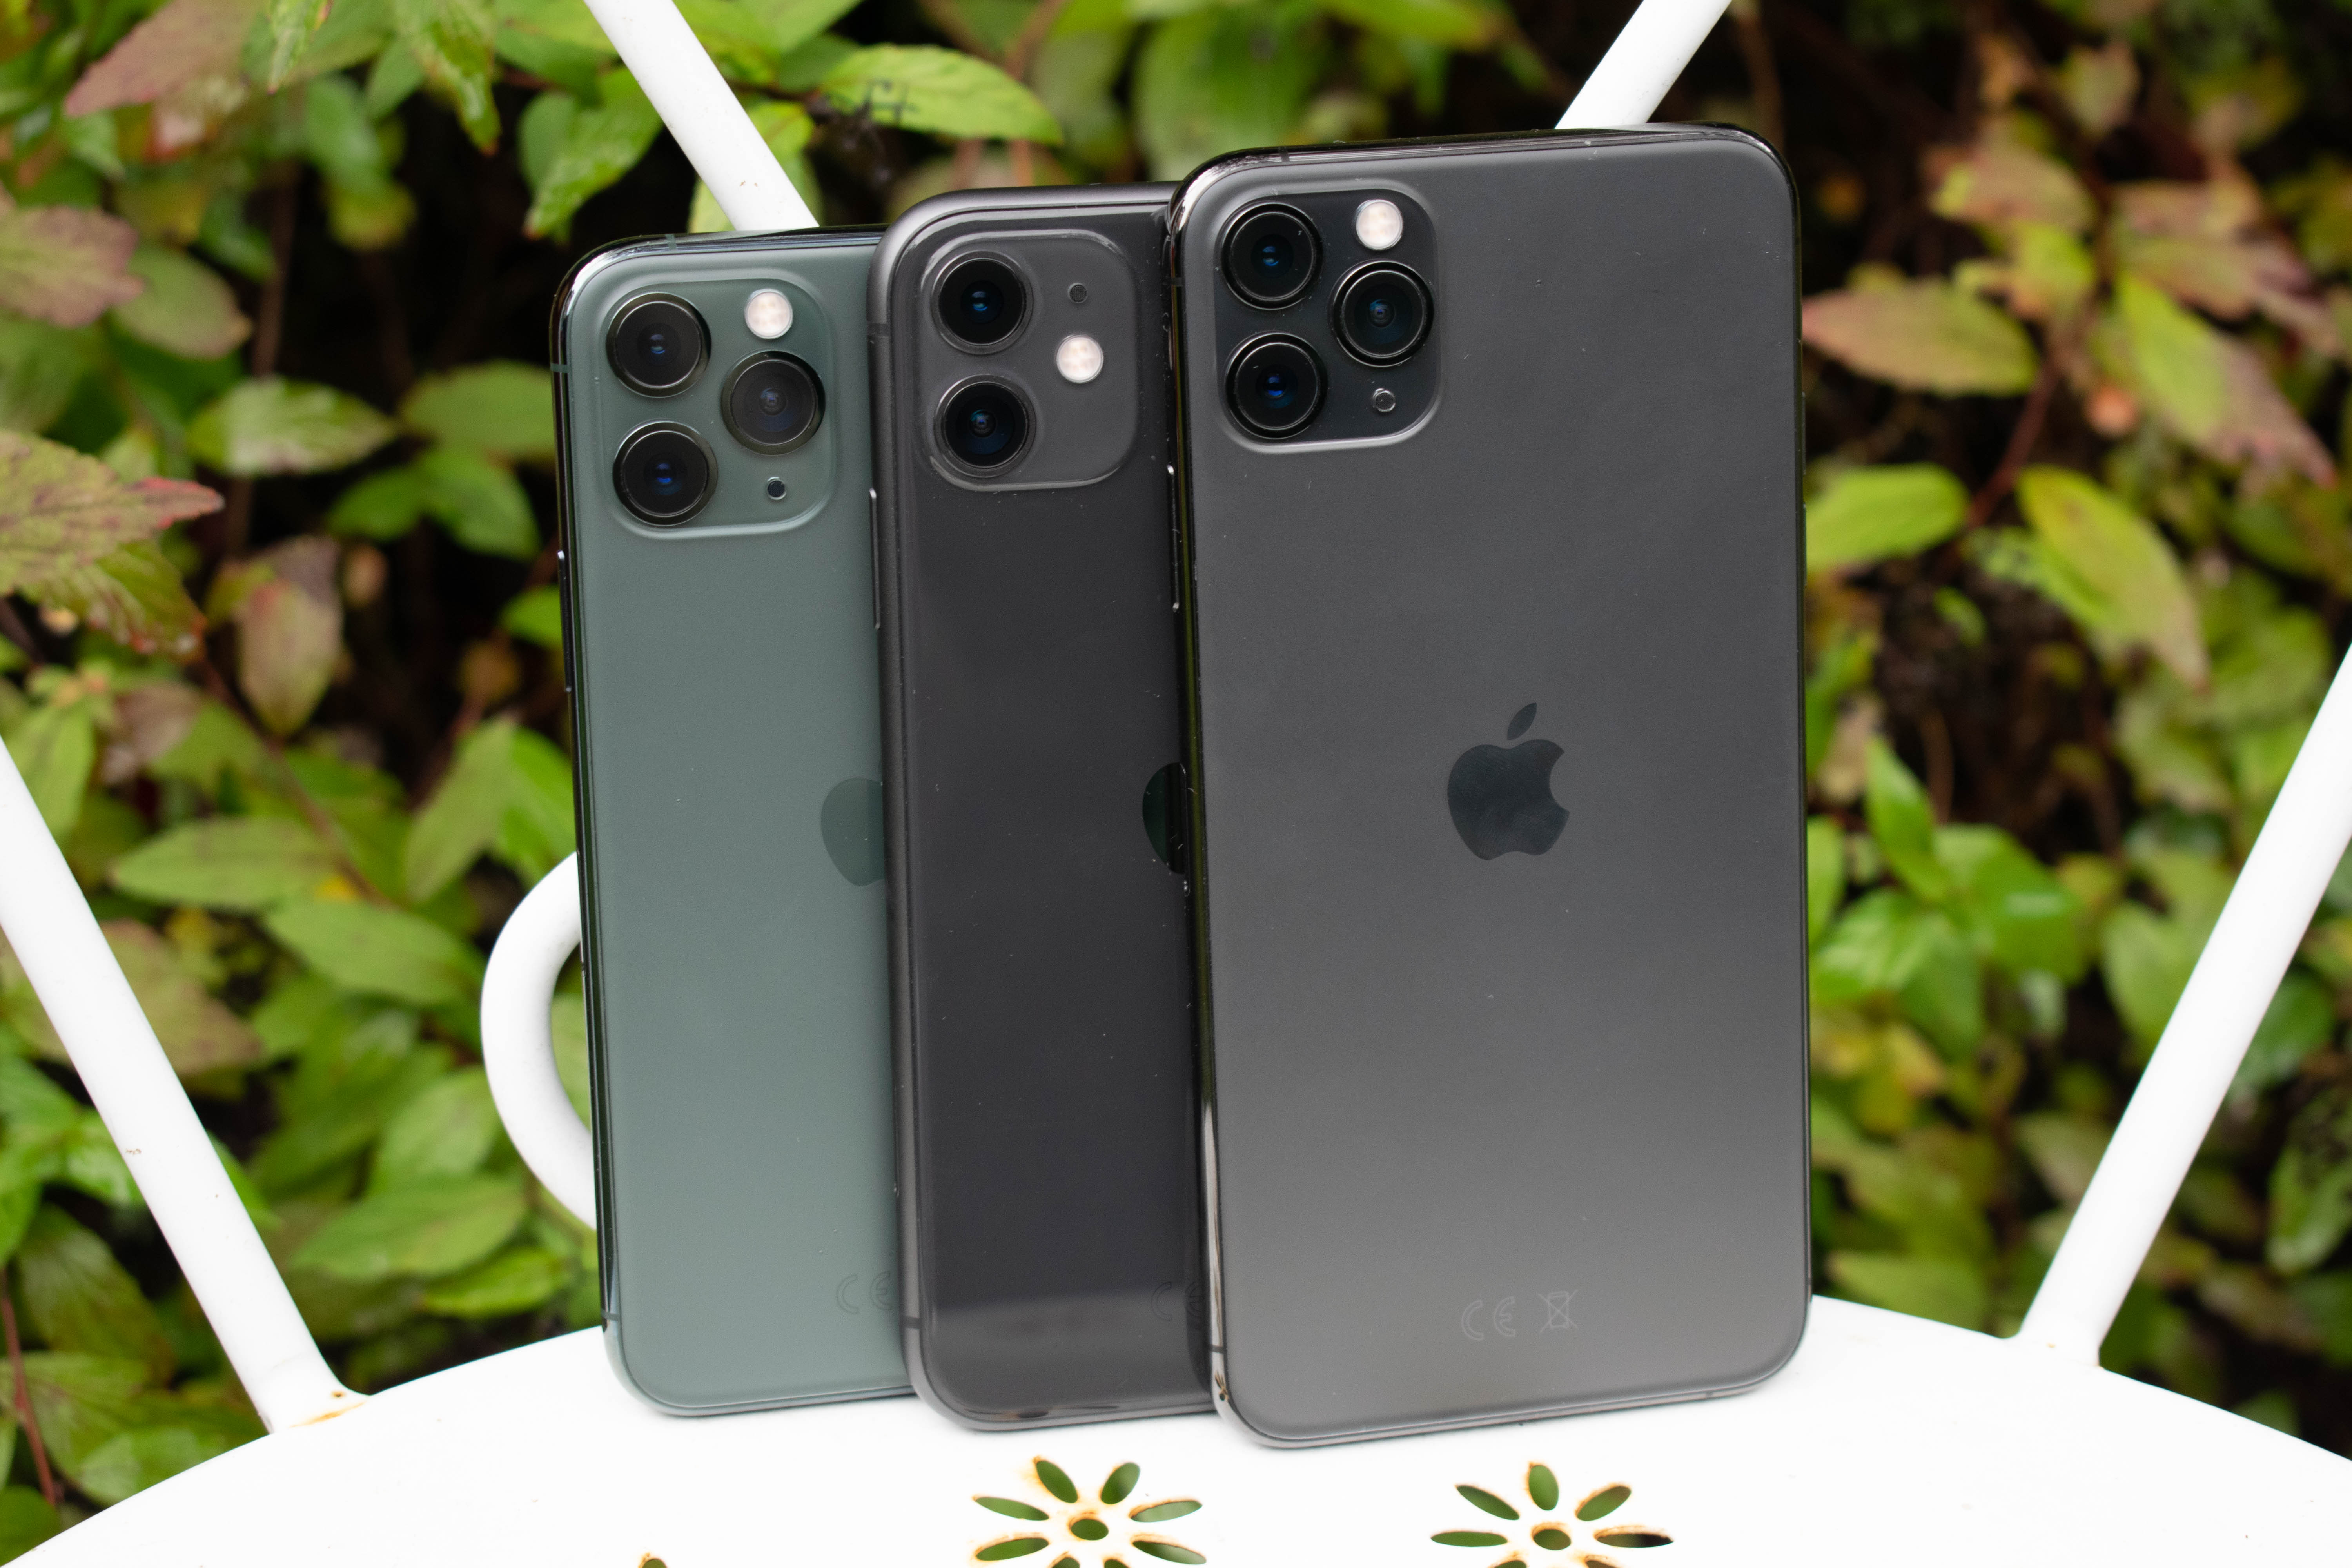 Apple iPhone 11 Pro and Pro Max review: great battery life, screen and  camera - The Verge